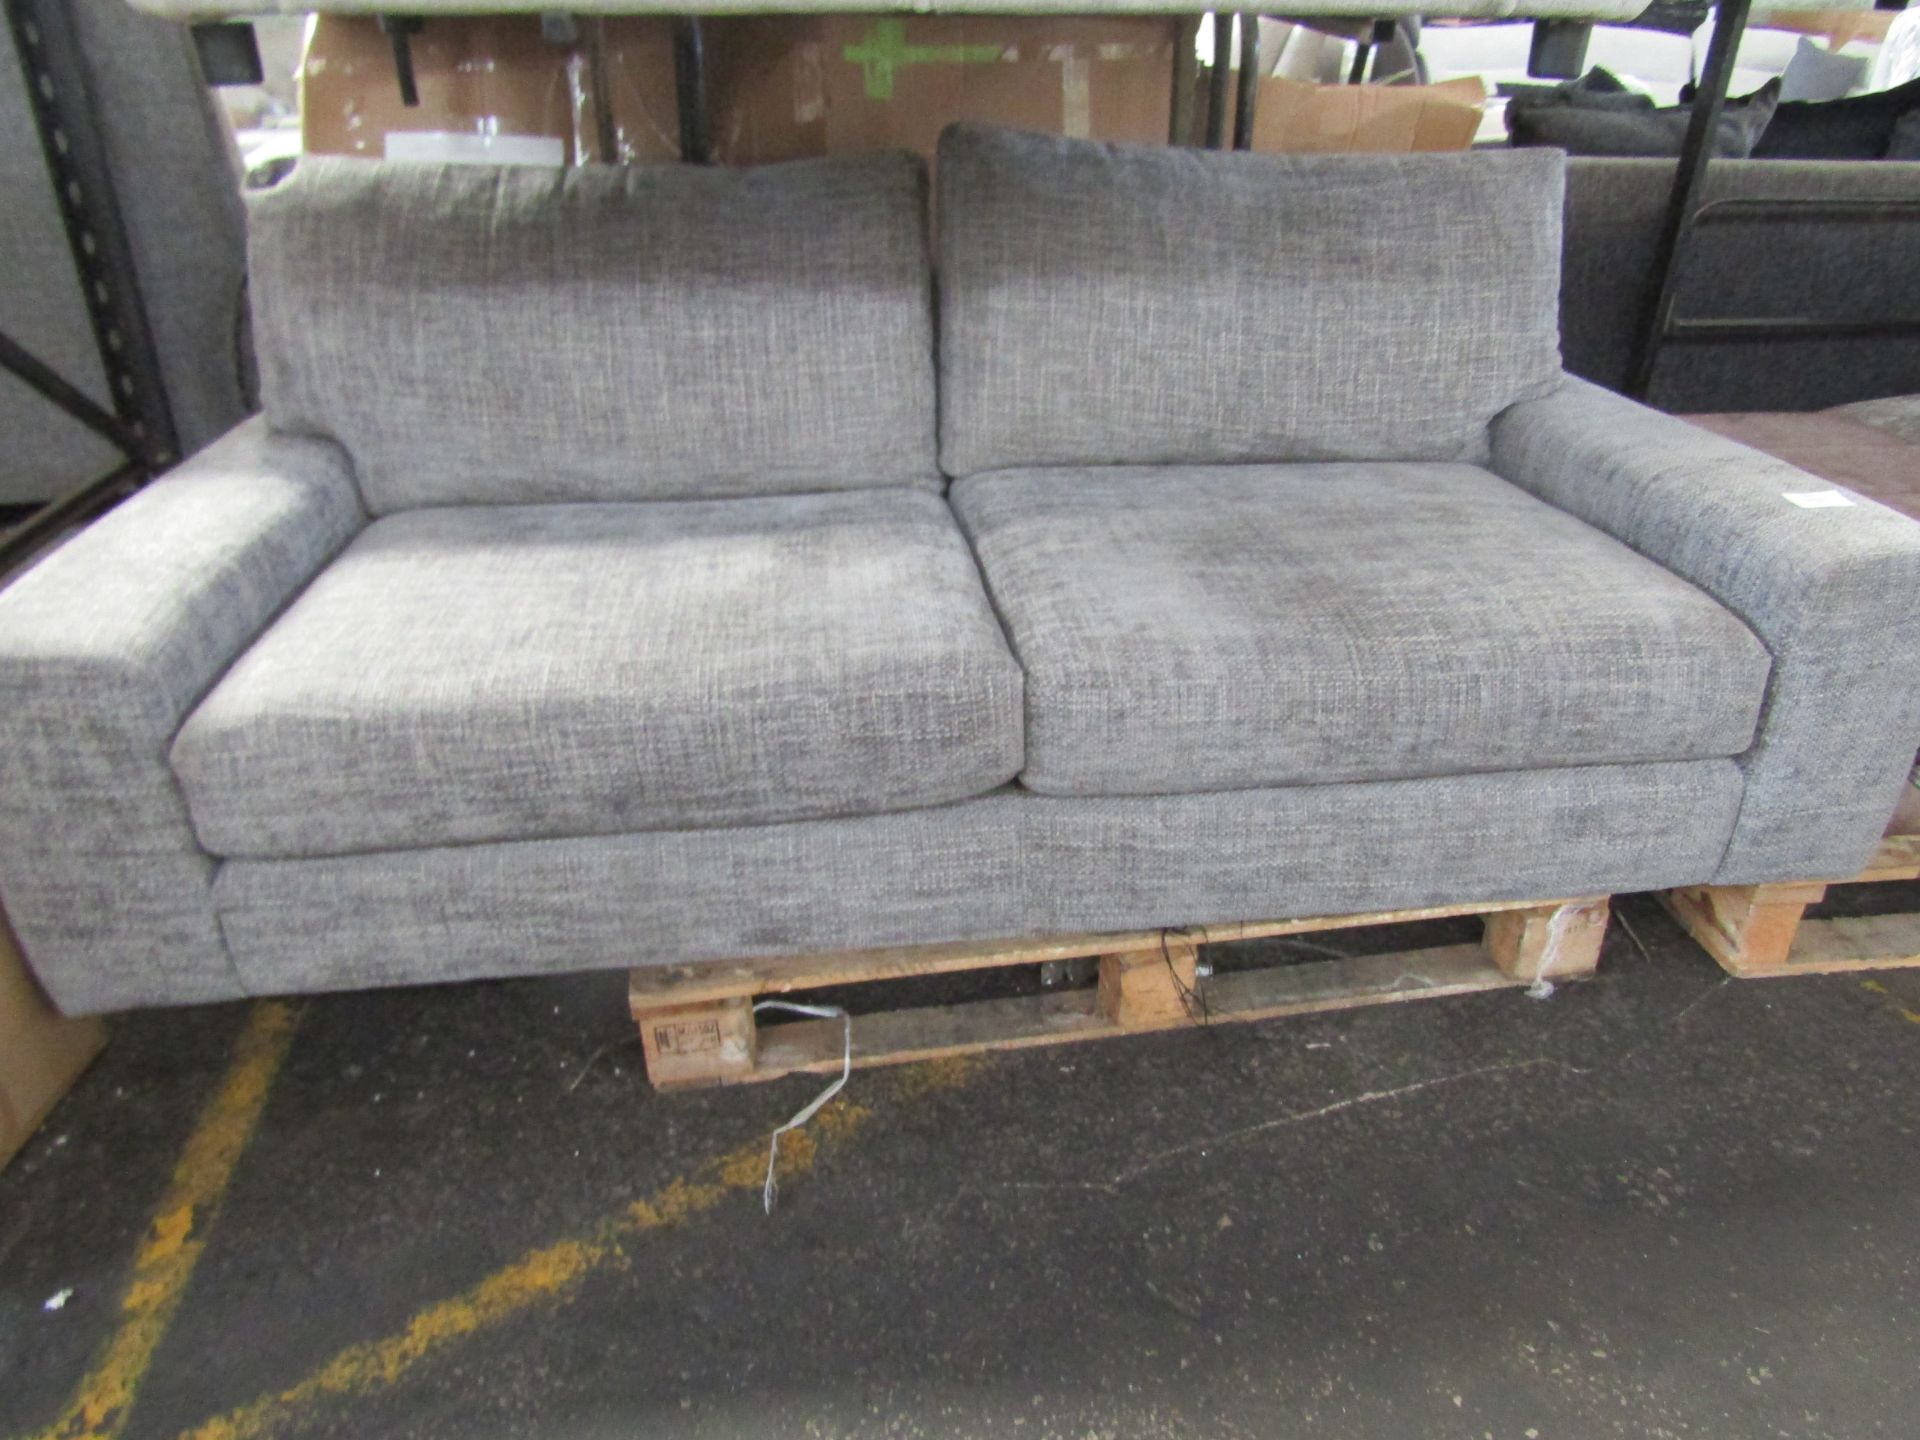 Oak Furnitureland Melbourne 4 Seater Sofa in Enzo Slate Fabric RRP 900 About the Product(s)